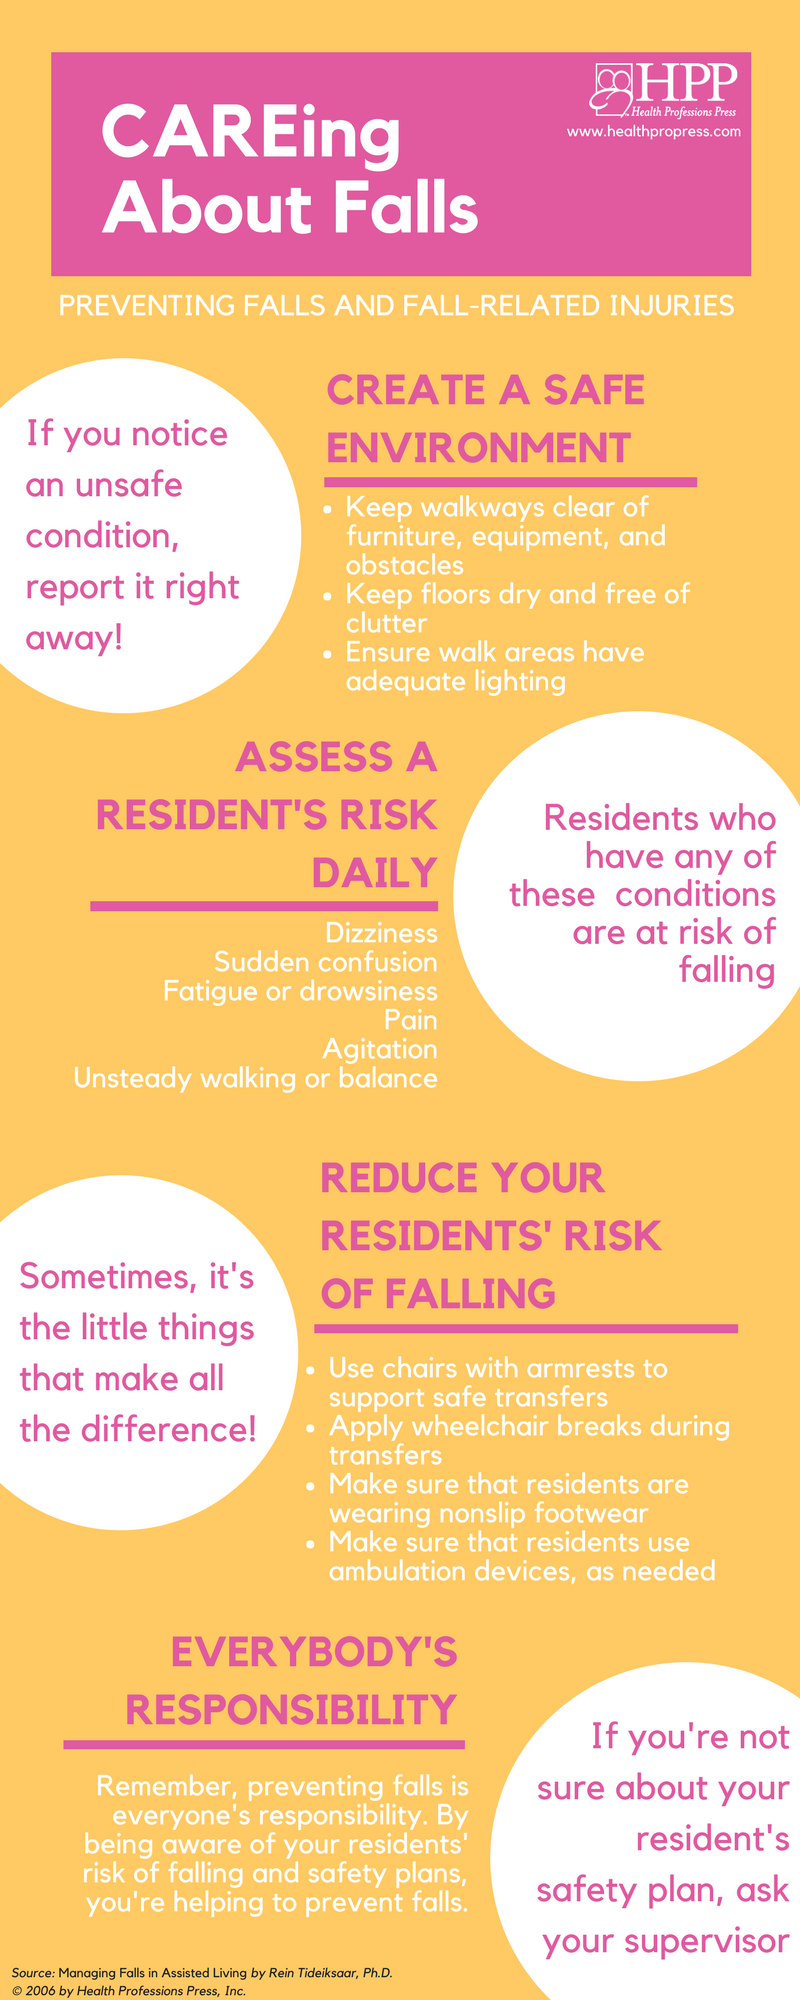 CAREing ABOUT FALLS infographic